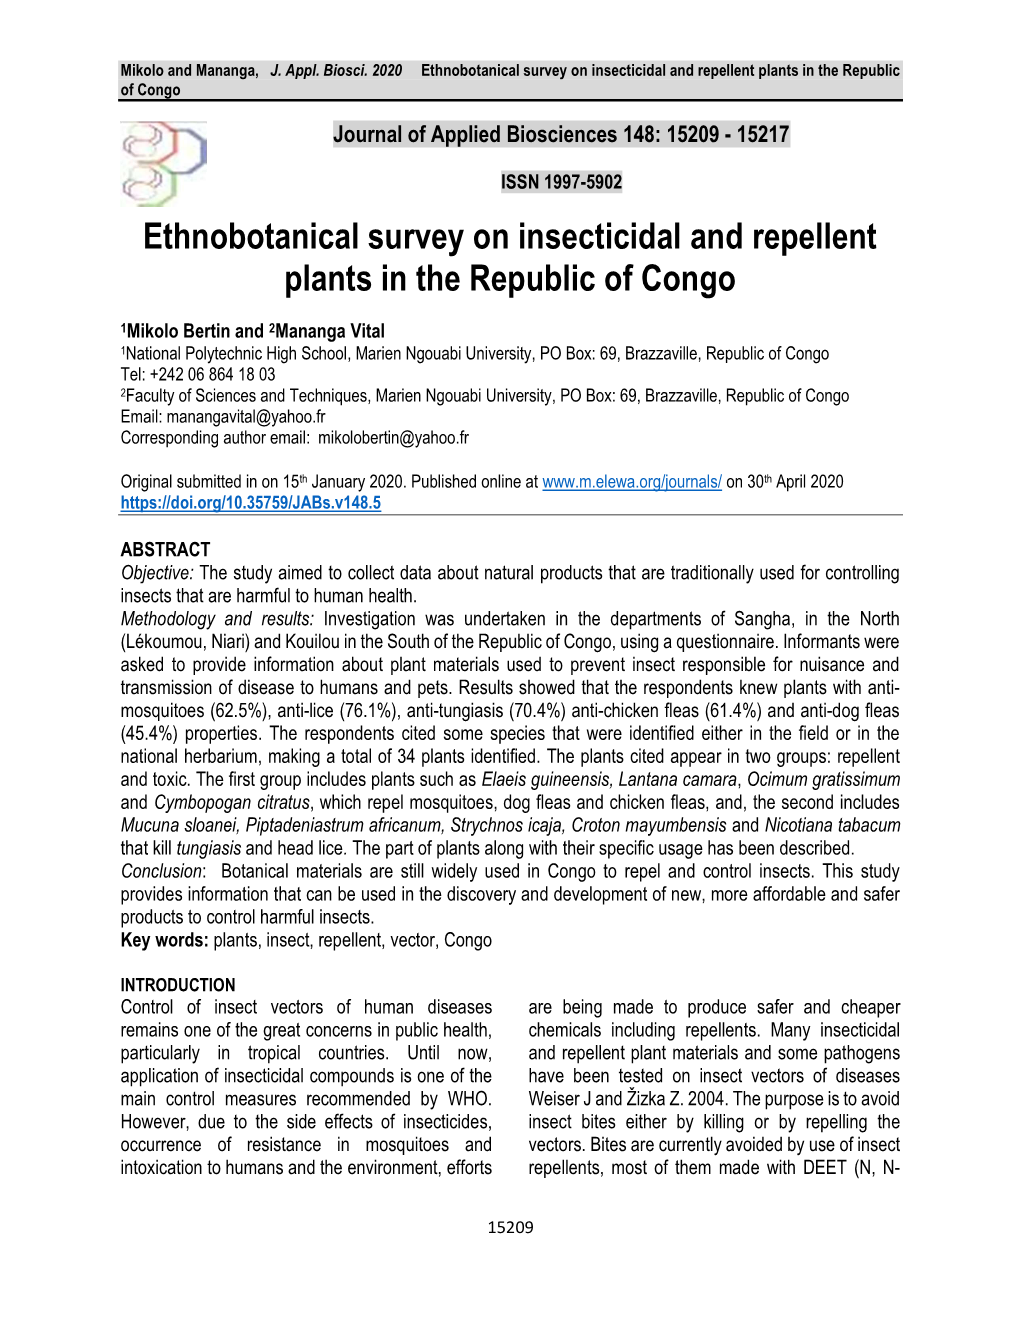 Ethnobotanical Survey on Insecticidal and Repellent Plants in the Republic of Congo